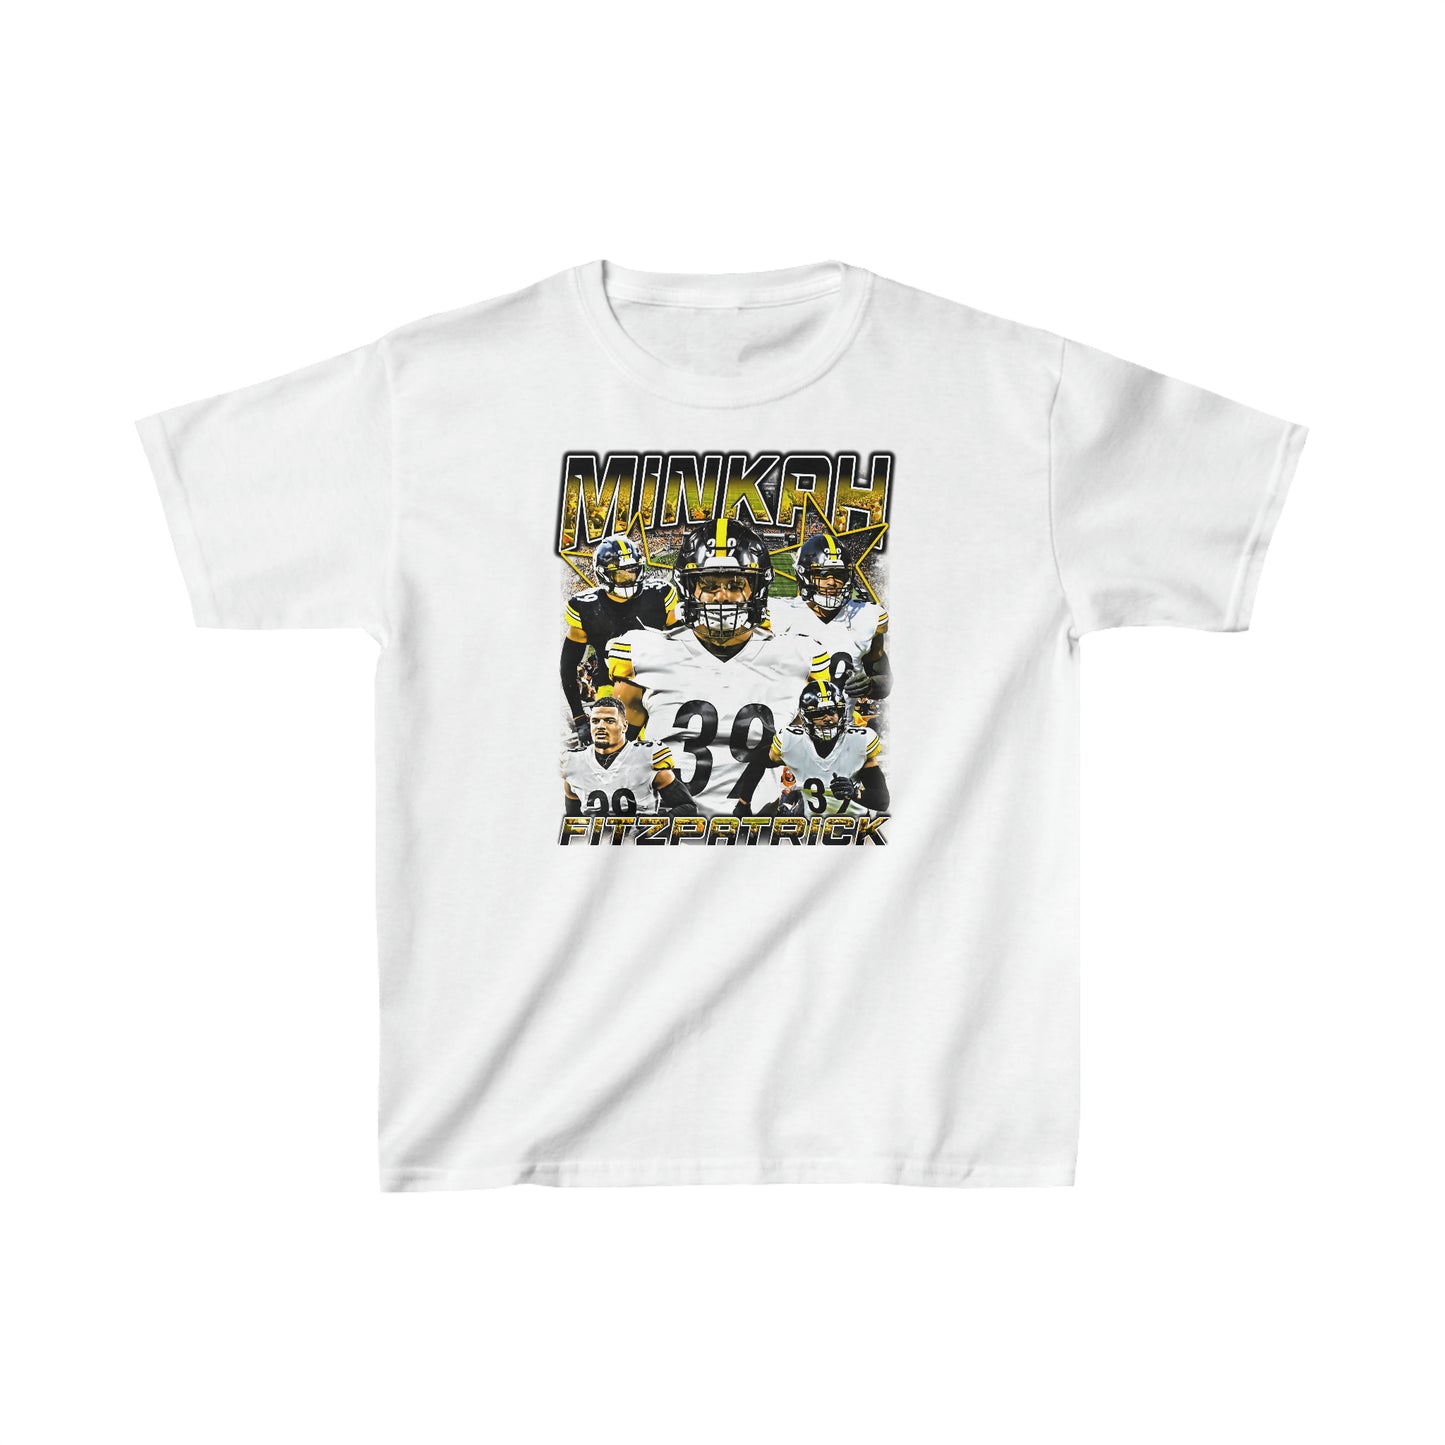 Youth WIY x Fitzpatrick Vintage T-Shirt